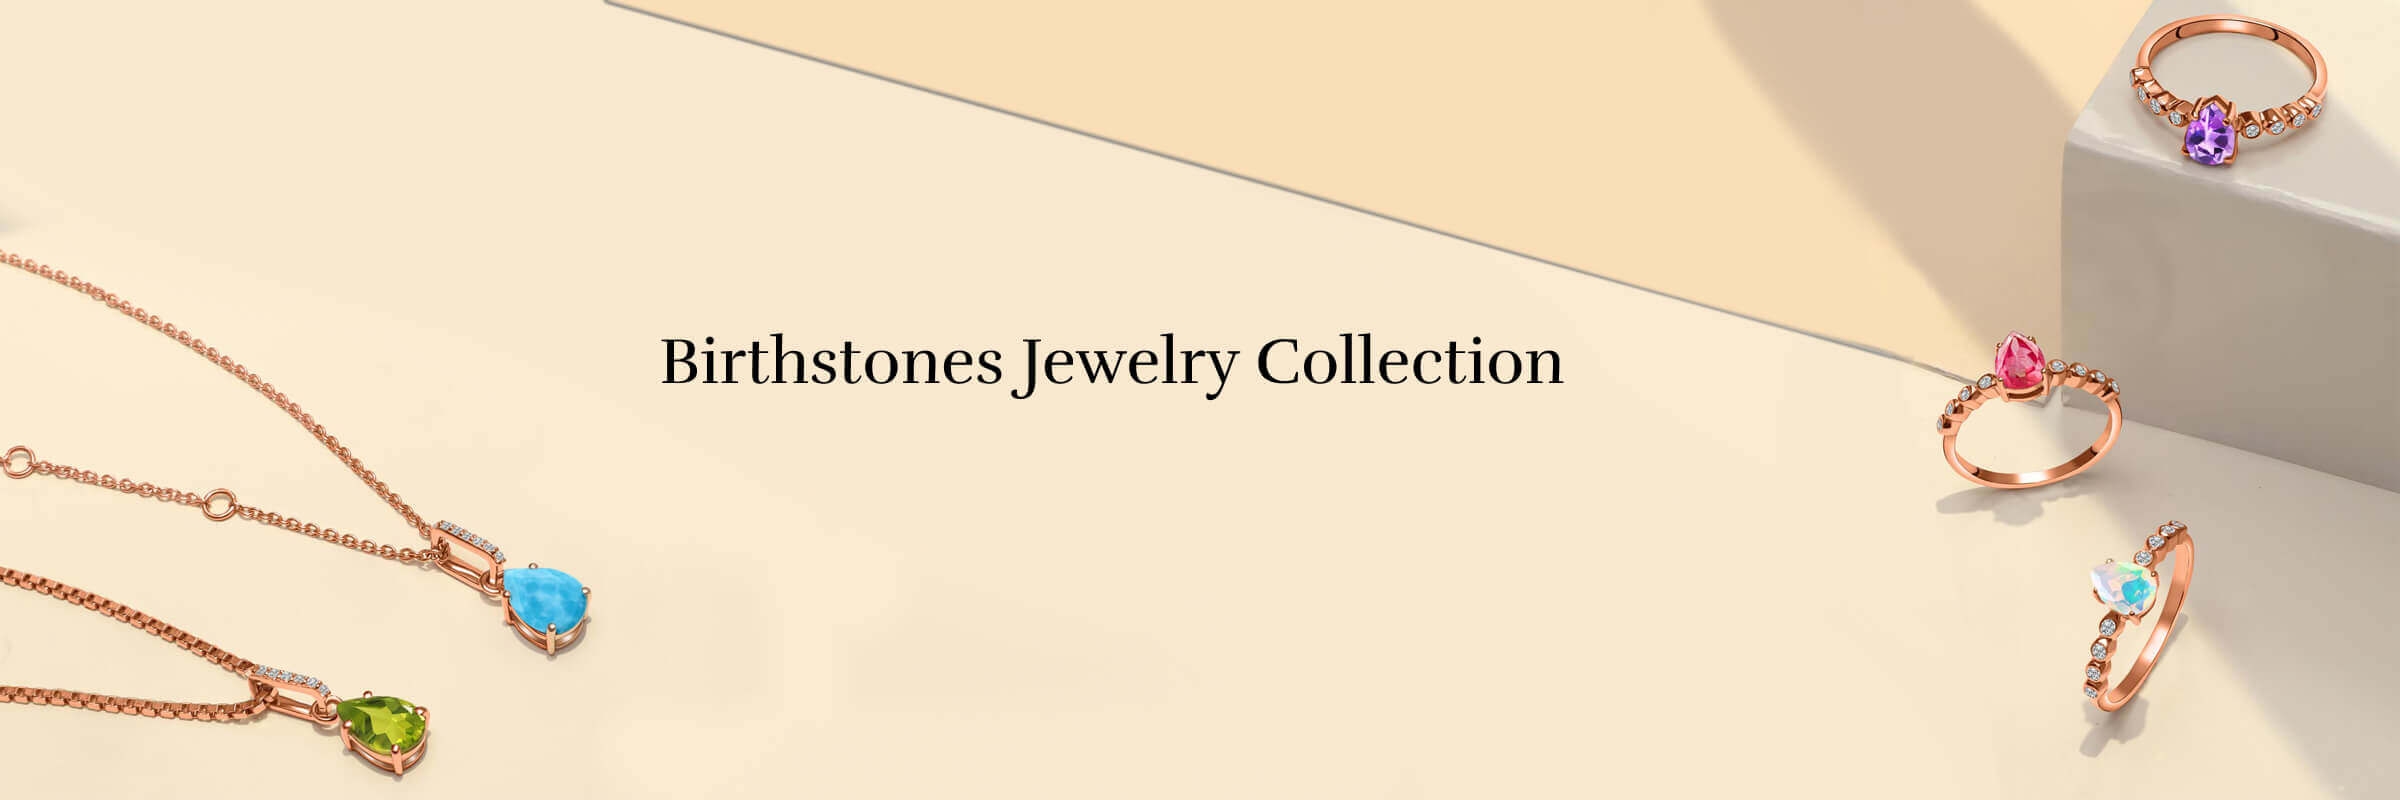 Birthstones Jewelry: Traditional Gifts of Jewelry